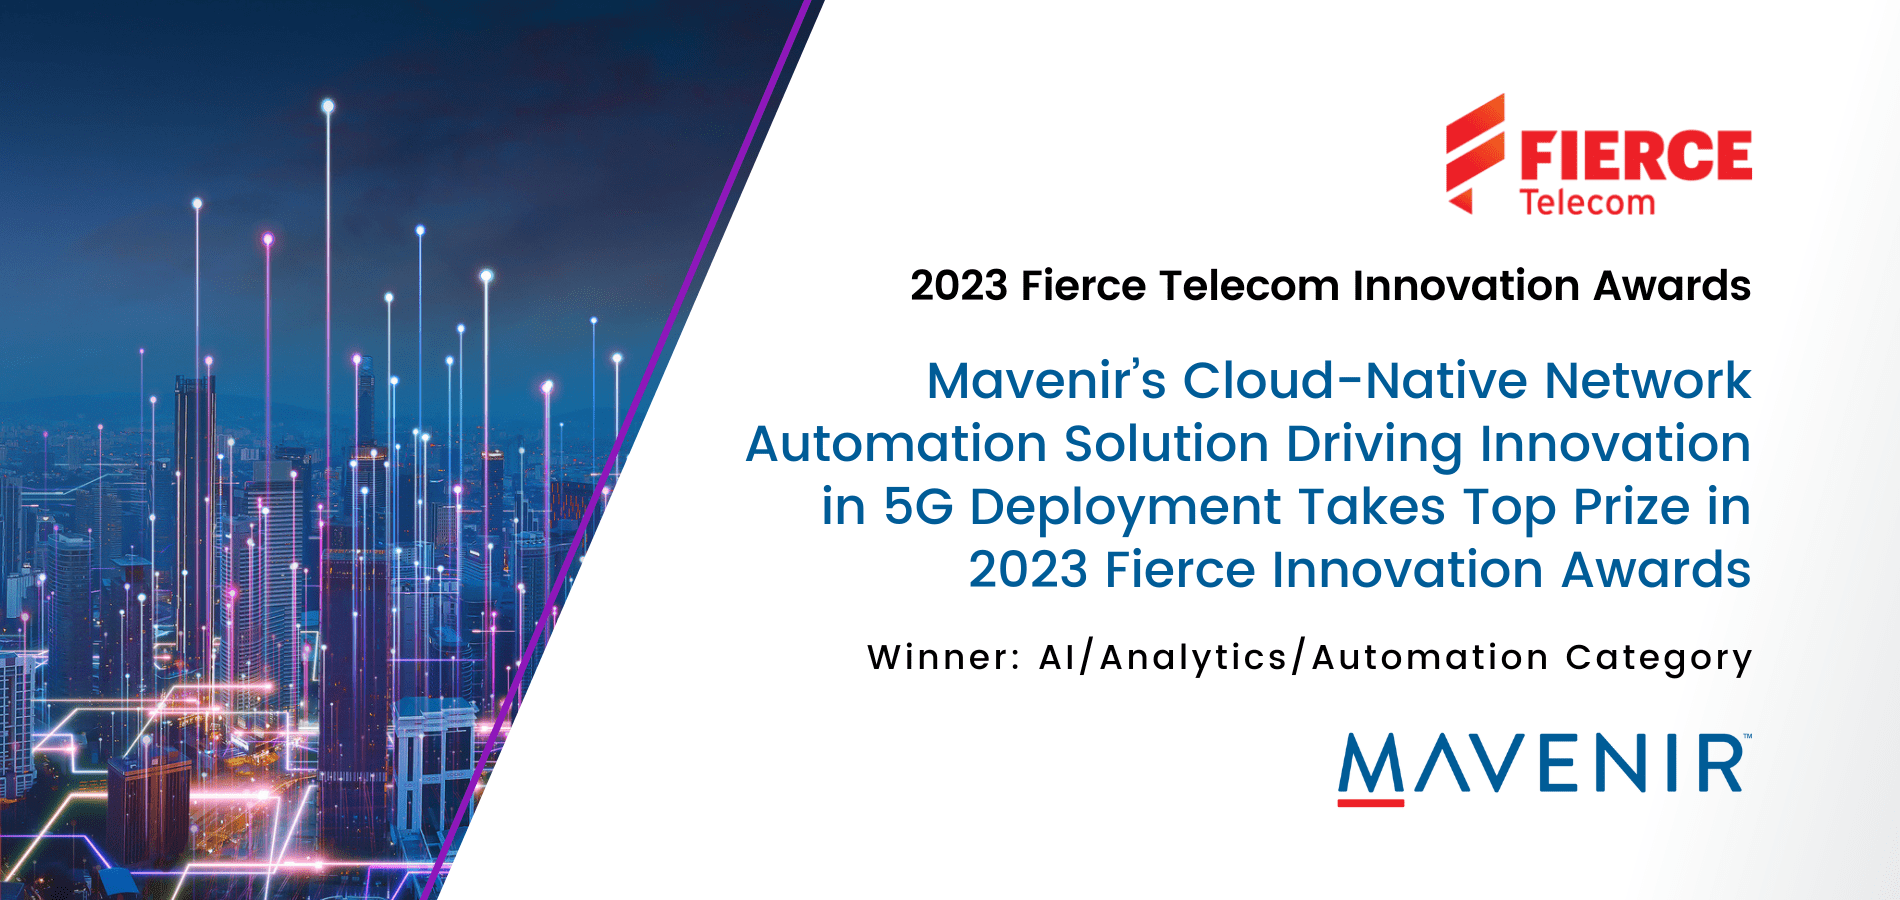 Mavenir’s Cloud-Native Network Automation Solution Driving Innovation in 5G Deployment Takes Top Prize in 2023 Fierce Innovation Awards